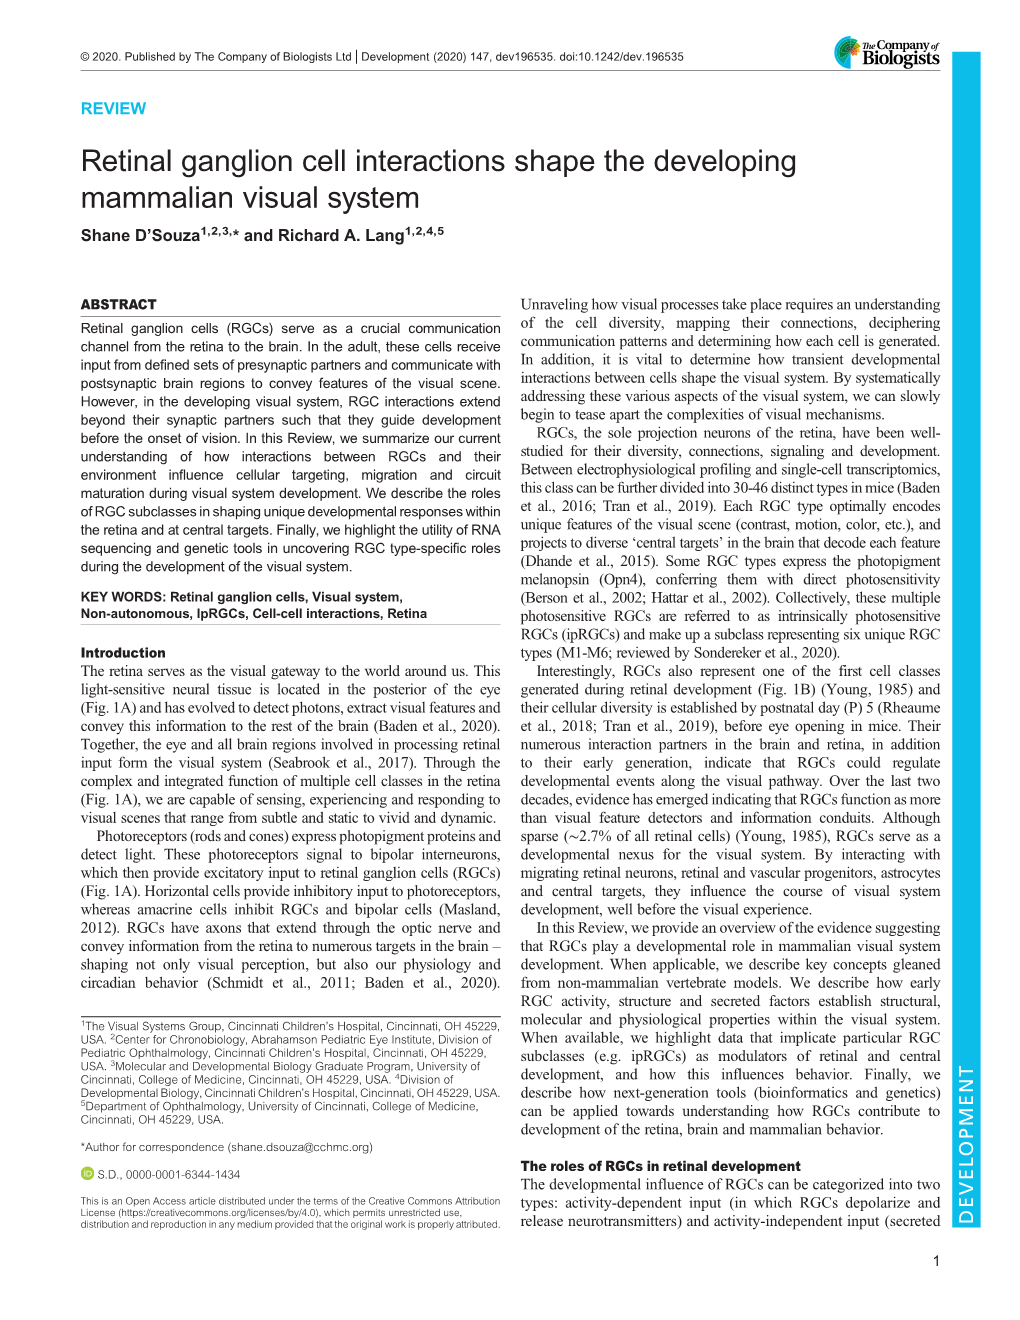 Retinal Ganglion Cell Interactions Shape the Developing Mammalian Visual System Shane D’Souza1,2,3,* and Richard A